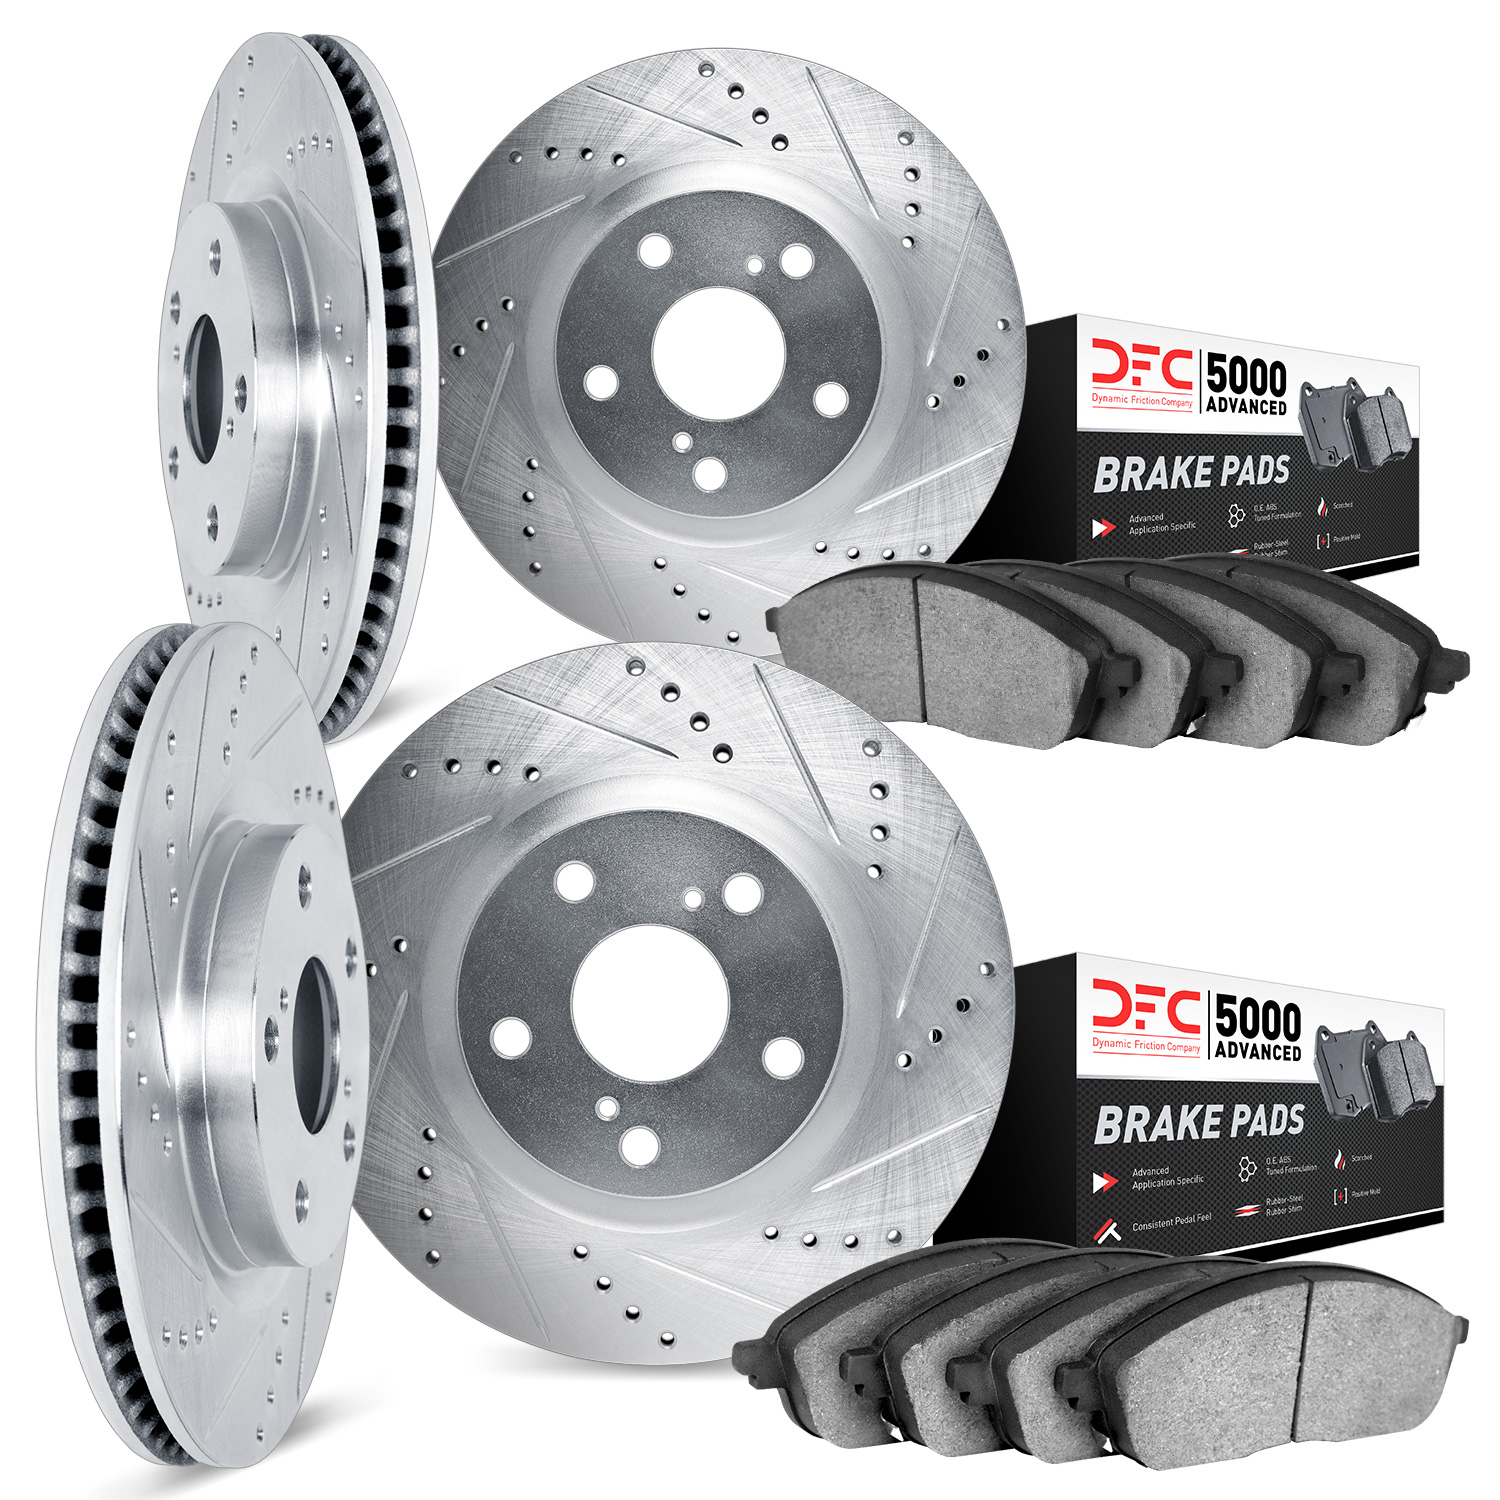 7504-80048 Drilled/Slotted Brake Rotors w/5000 Advanced Brake Pads Kit [Silver], 2007-2012 Ford/Lincoln/Mercury/Mazda, Position: